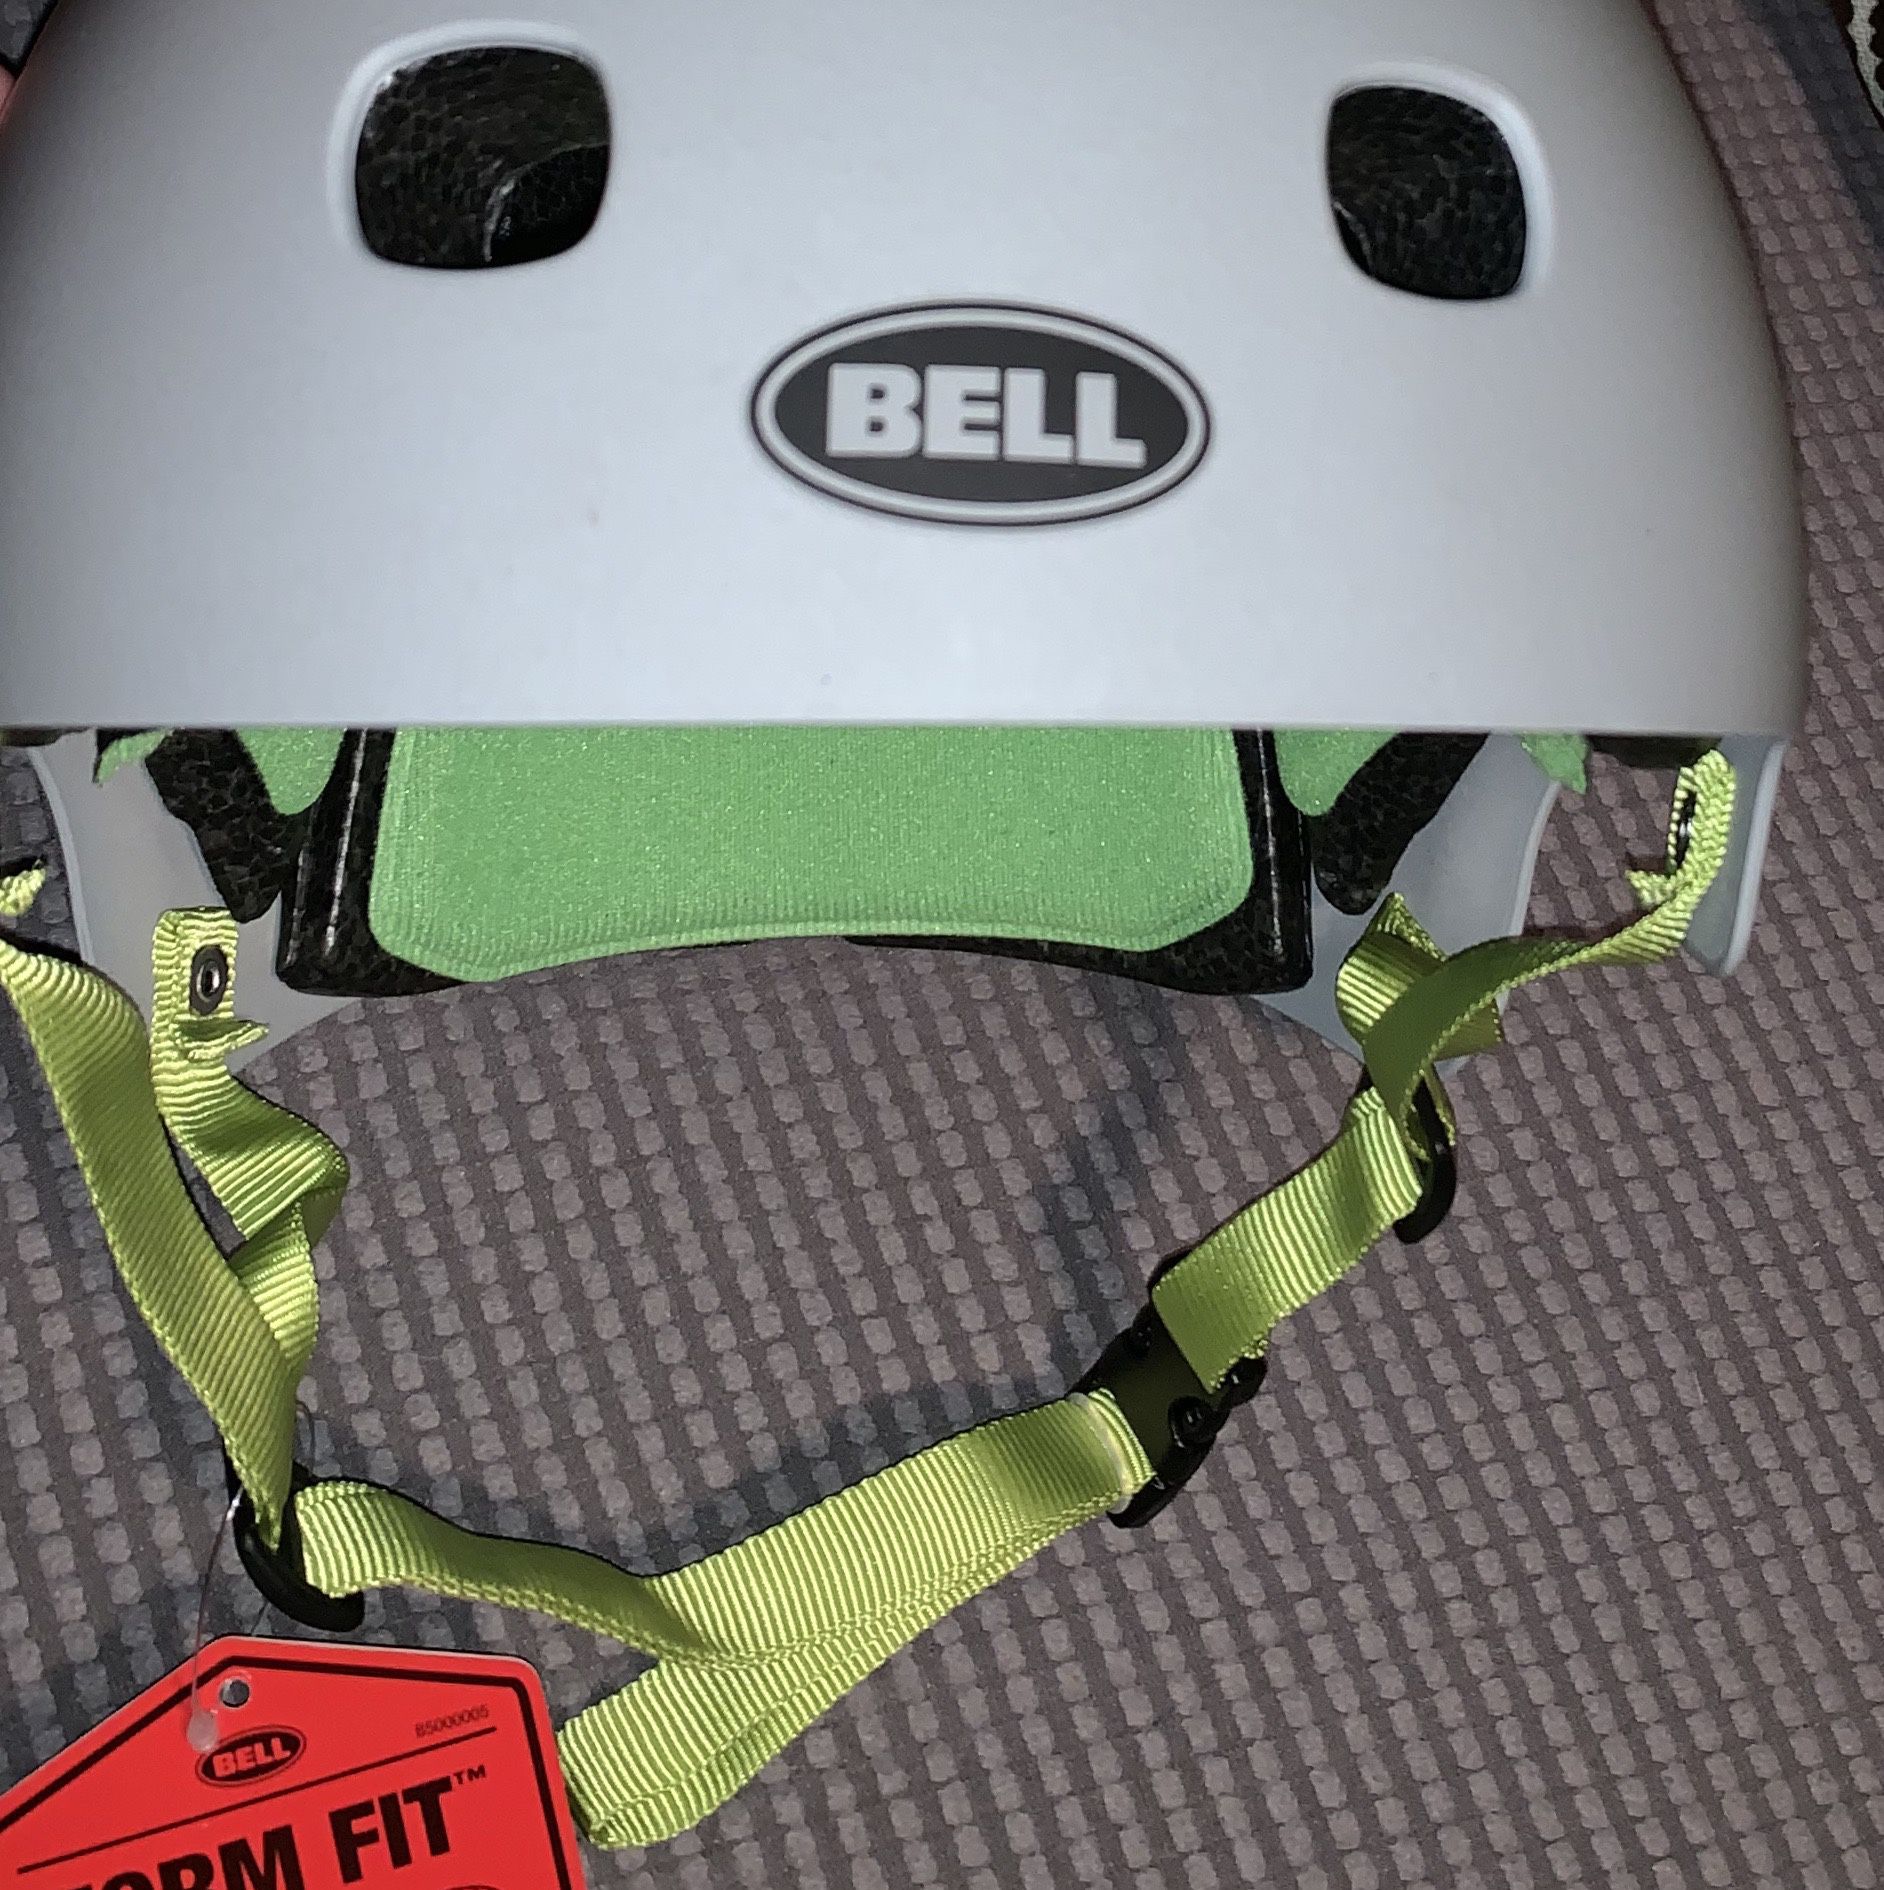 Bell Helmet, new never used condition